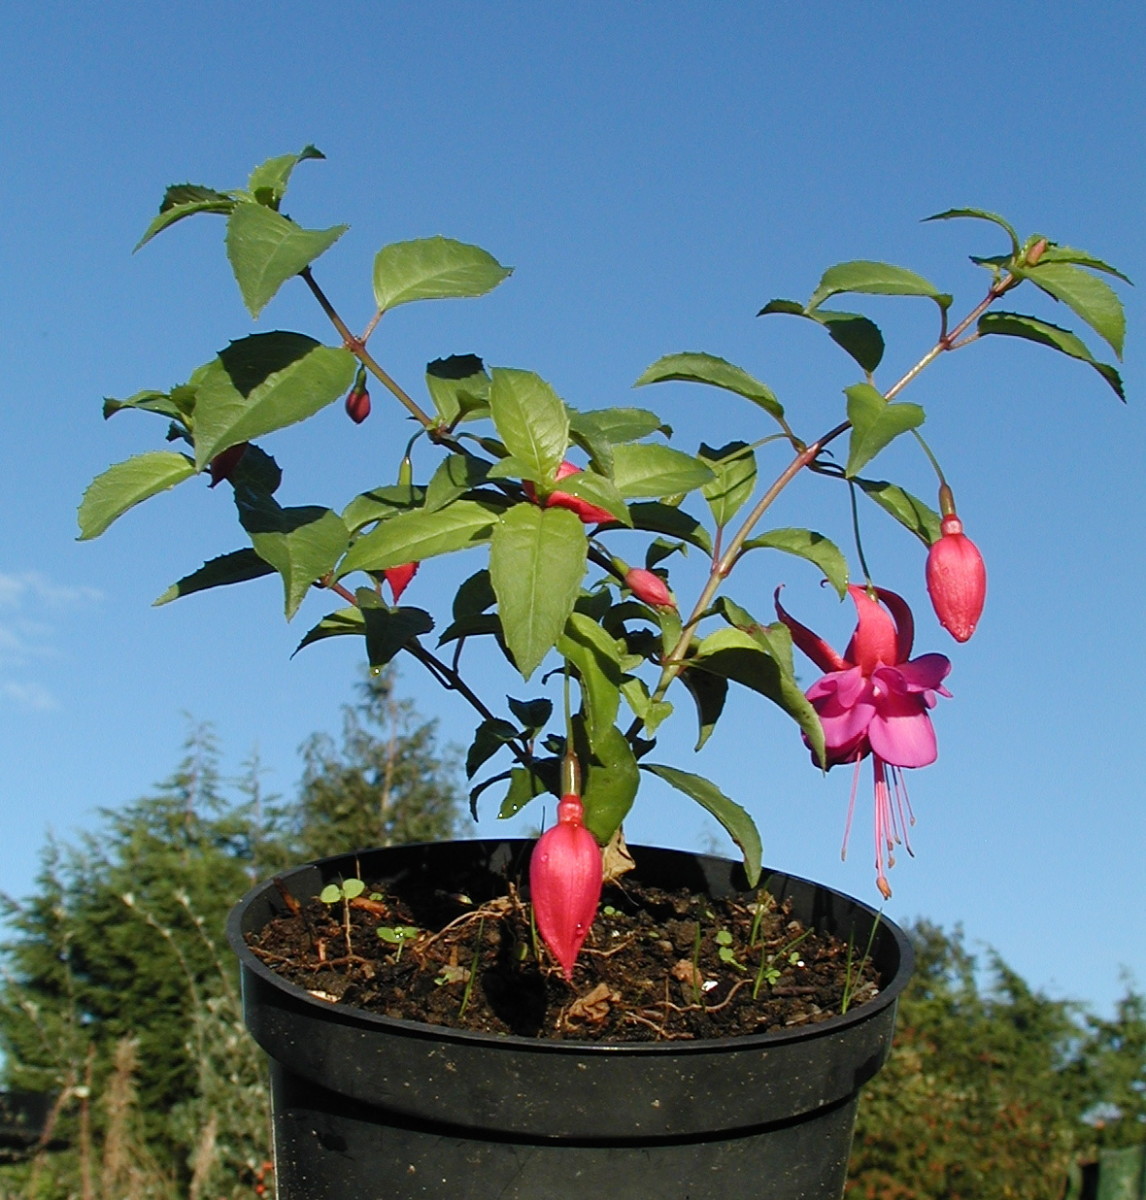 All varieties of fuchsia are easy to propagate from cuttings